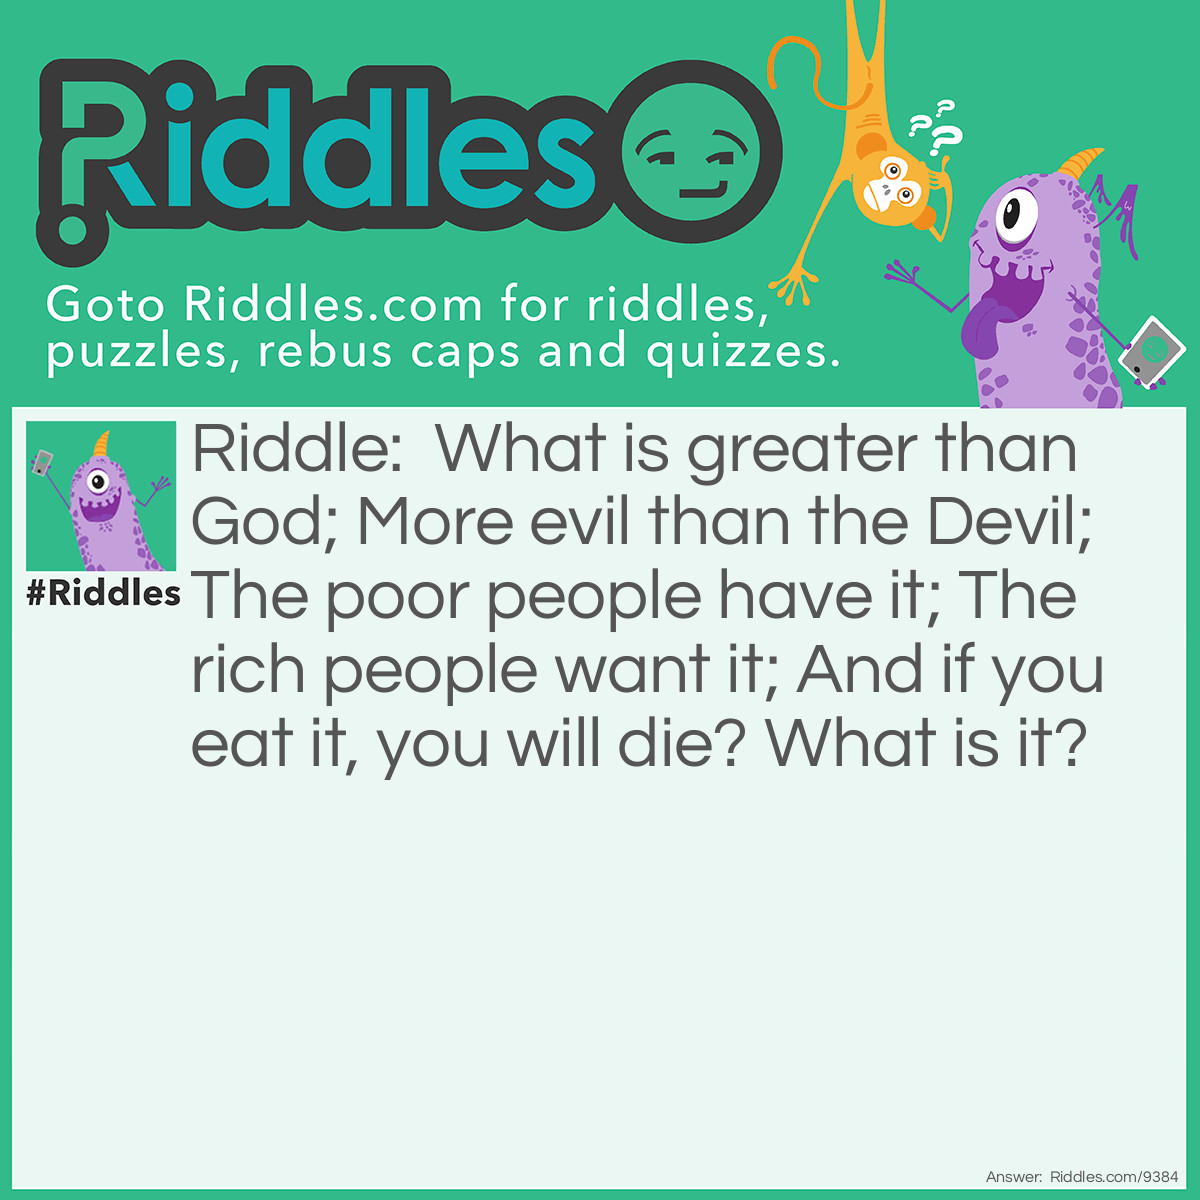 Riddle: What is greater than God; More evil than the Devil; The poor people have it; The rich people want it; And if you eat it, you will die? What is it? Answer: Nothing!